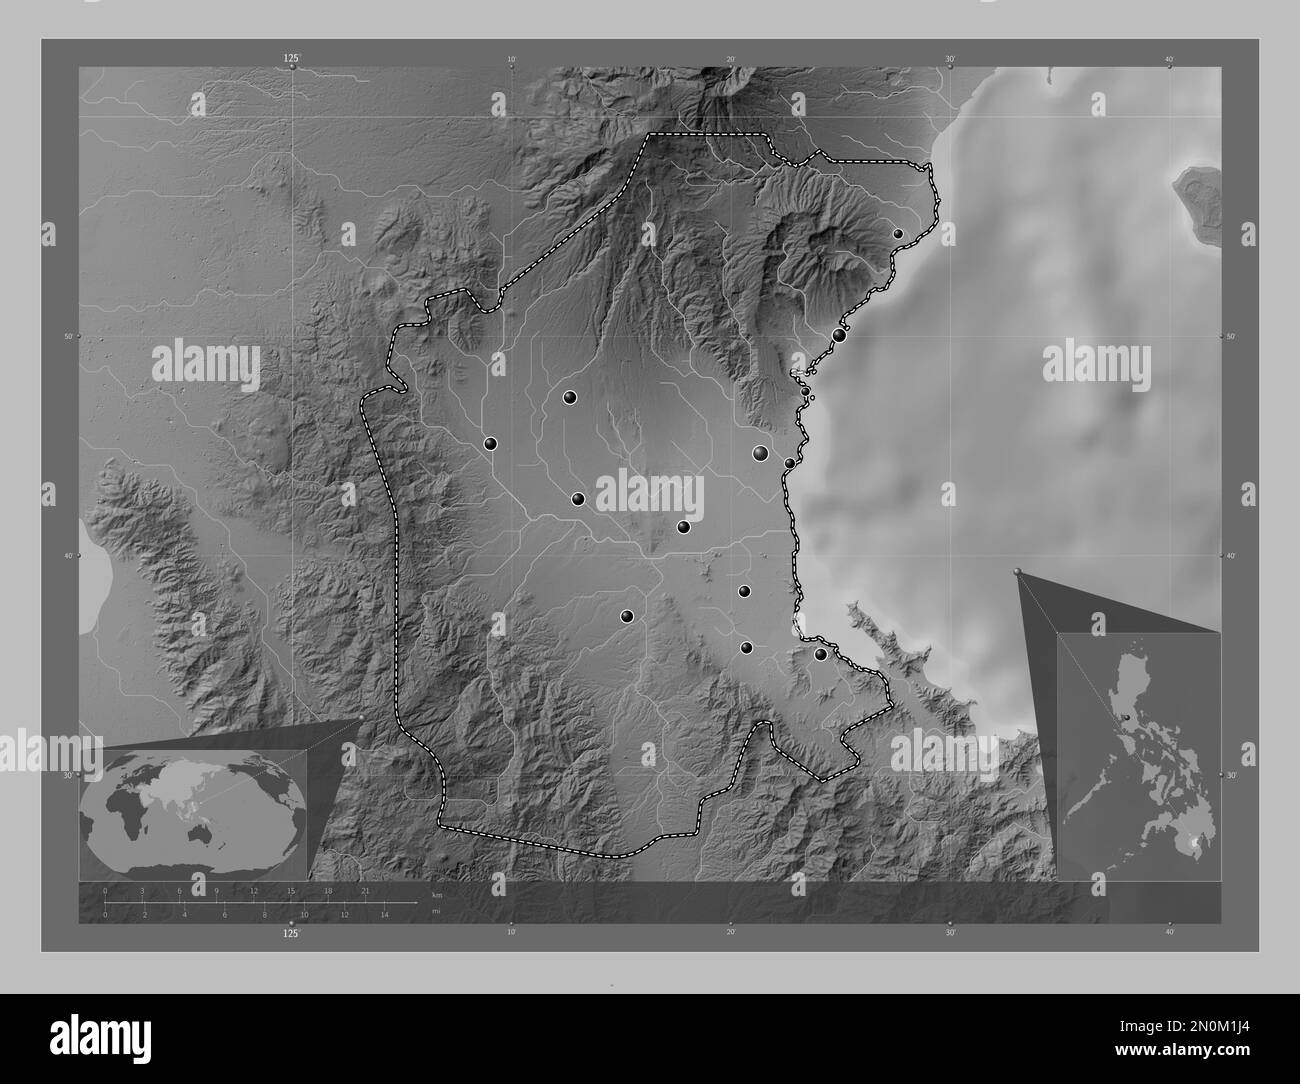 Davao Del Sur Province Of Philippines Grayscale Elevation Map With